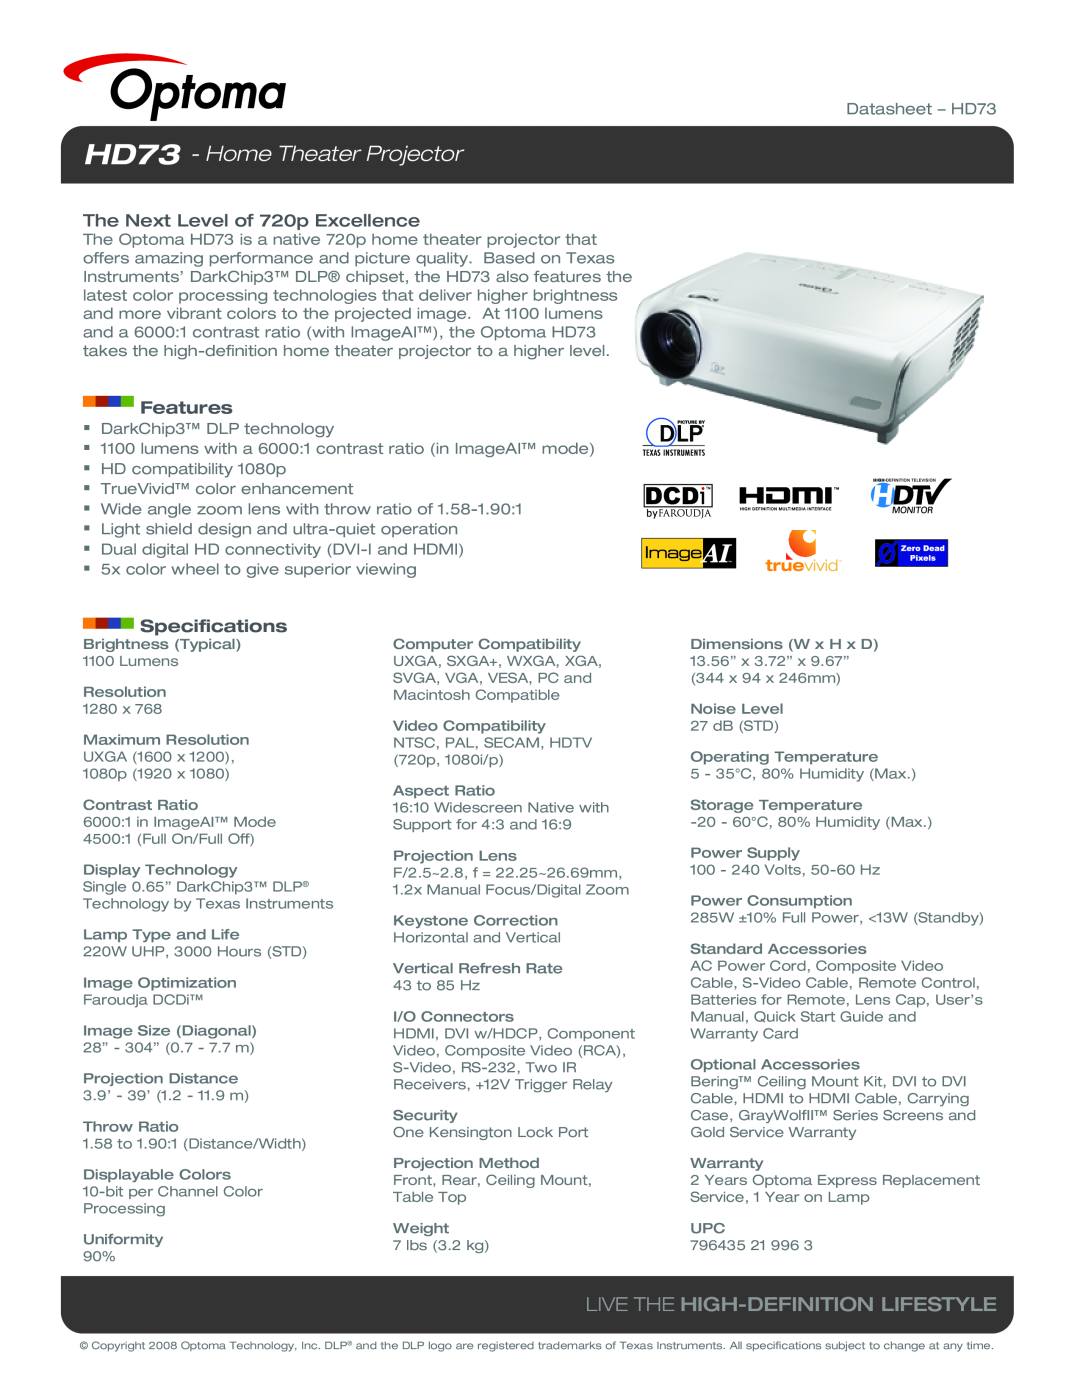 Optoma Technology specifications HD73 - Home Theater Projector, Live The High-Definition Lifestyle, Features 